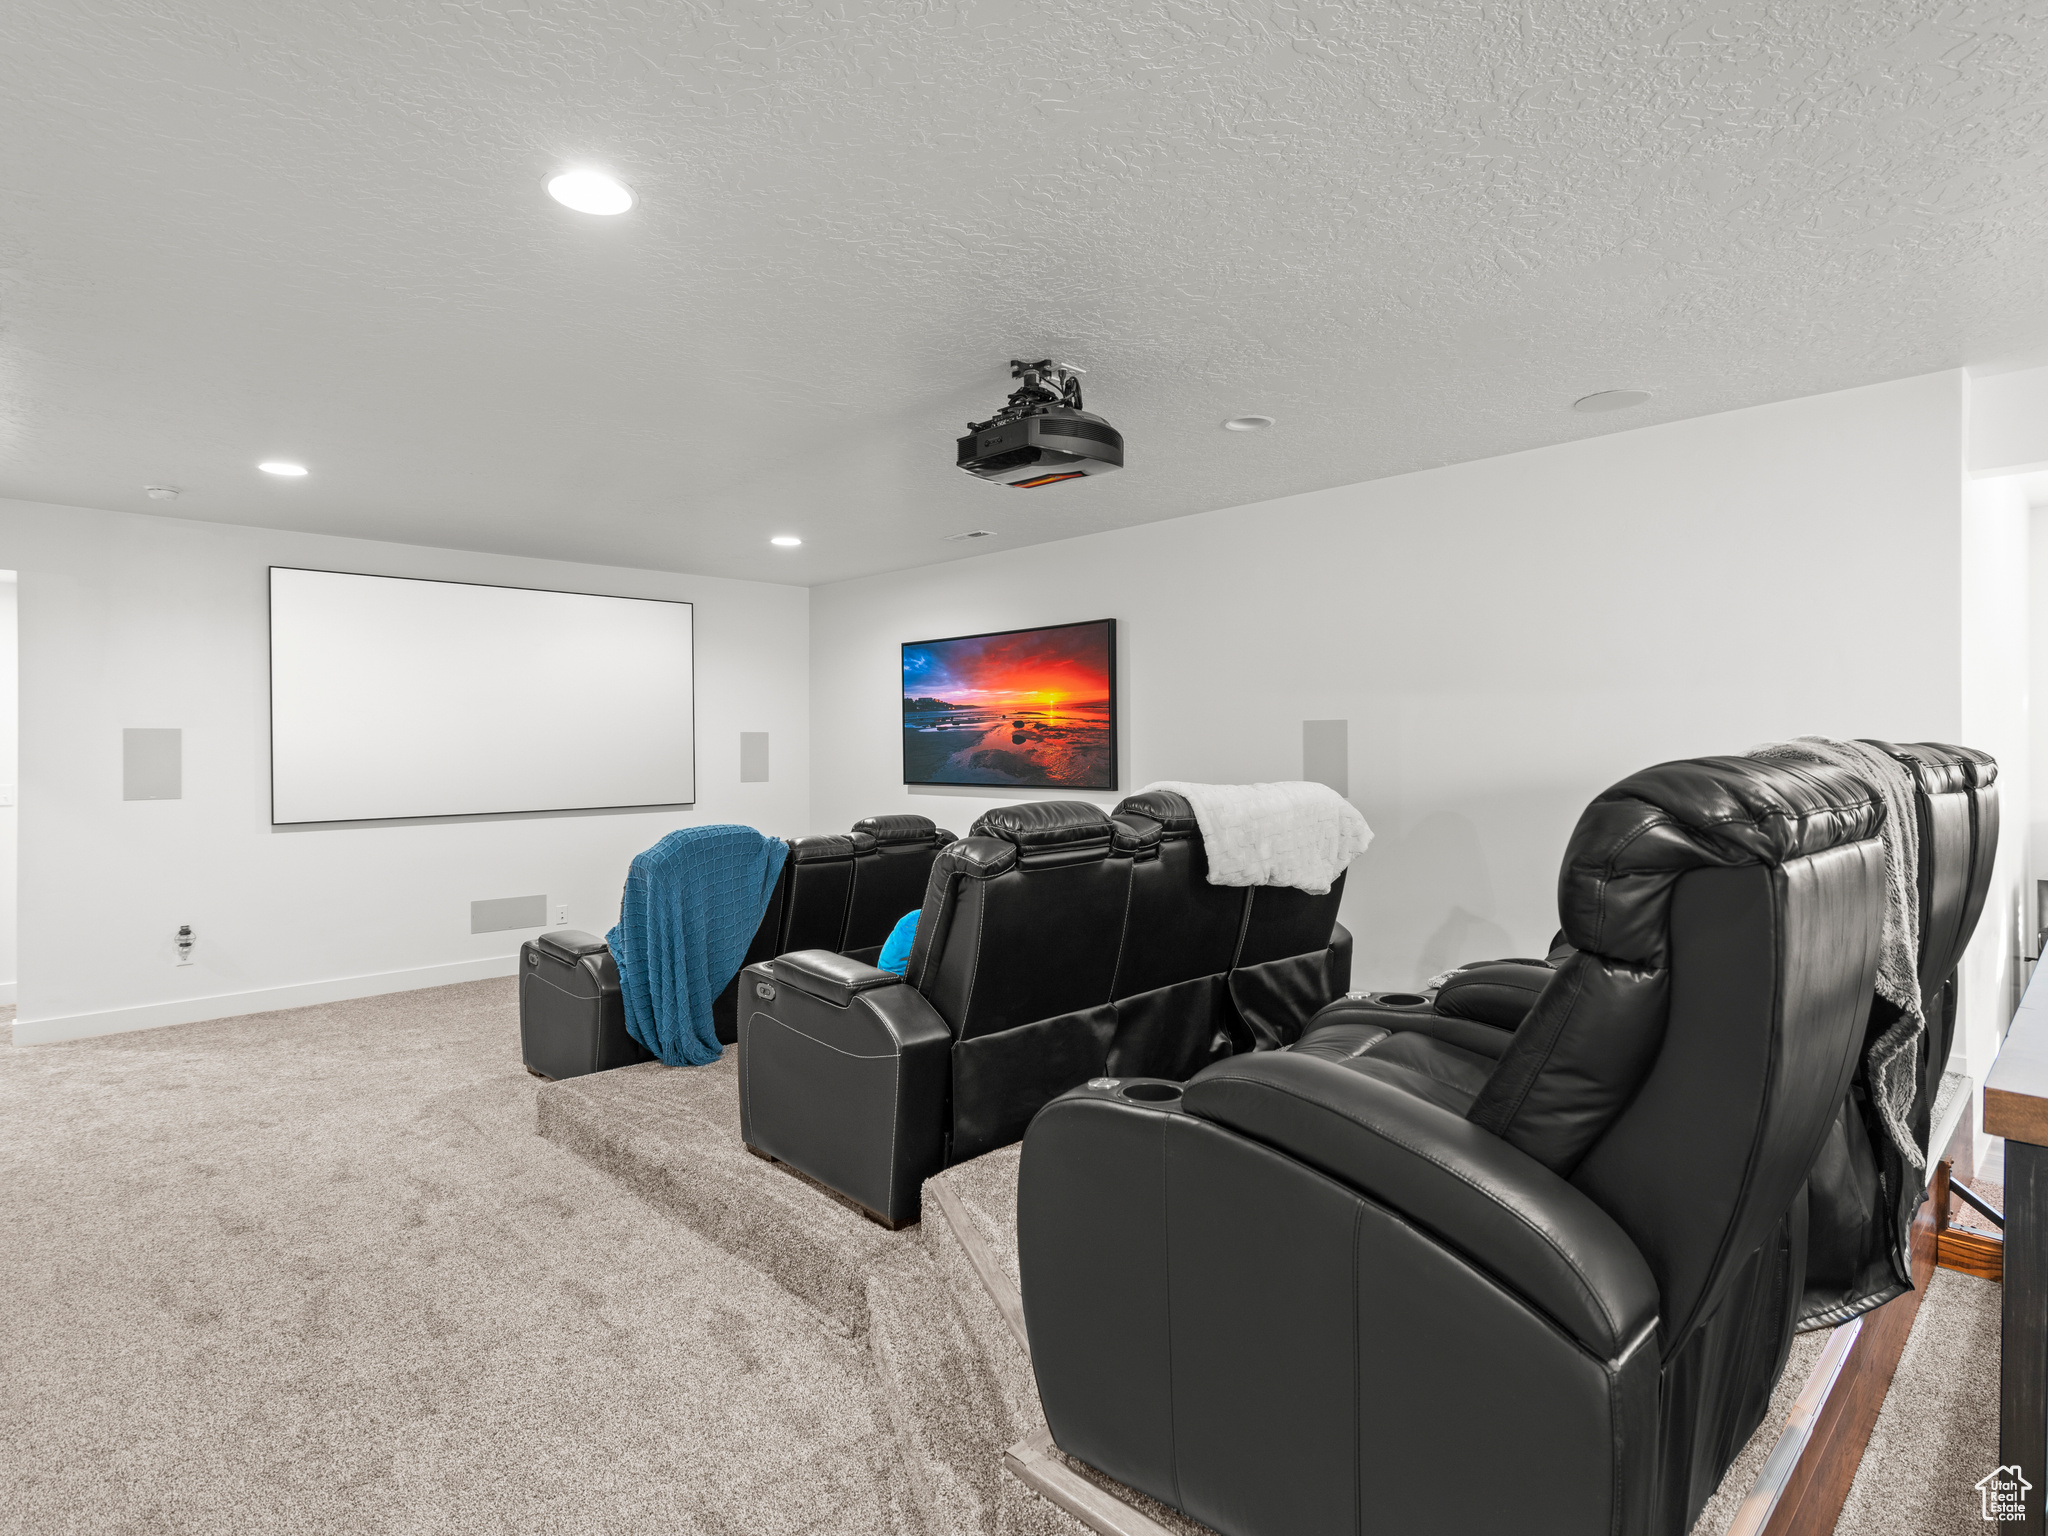 Home theater room featuring carpet floors and a textured ceiling